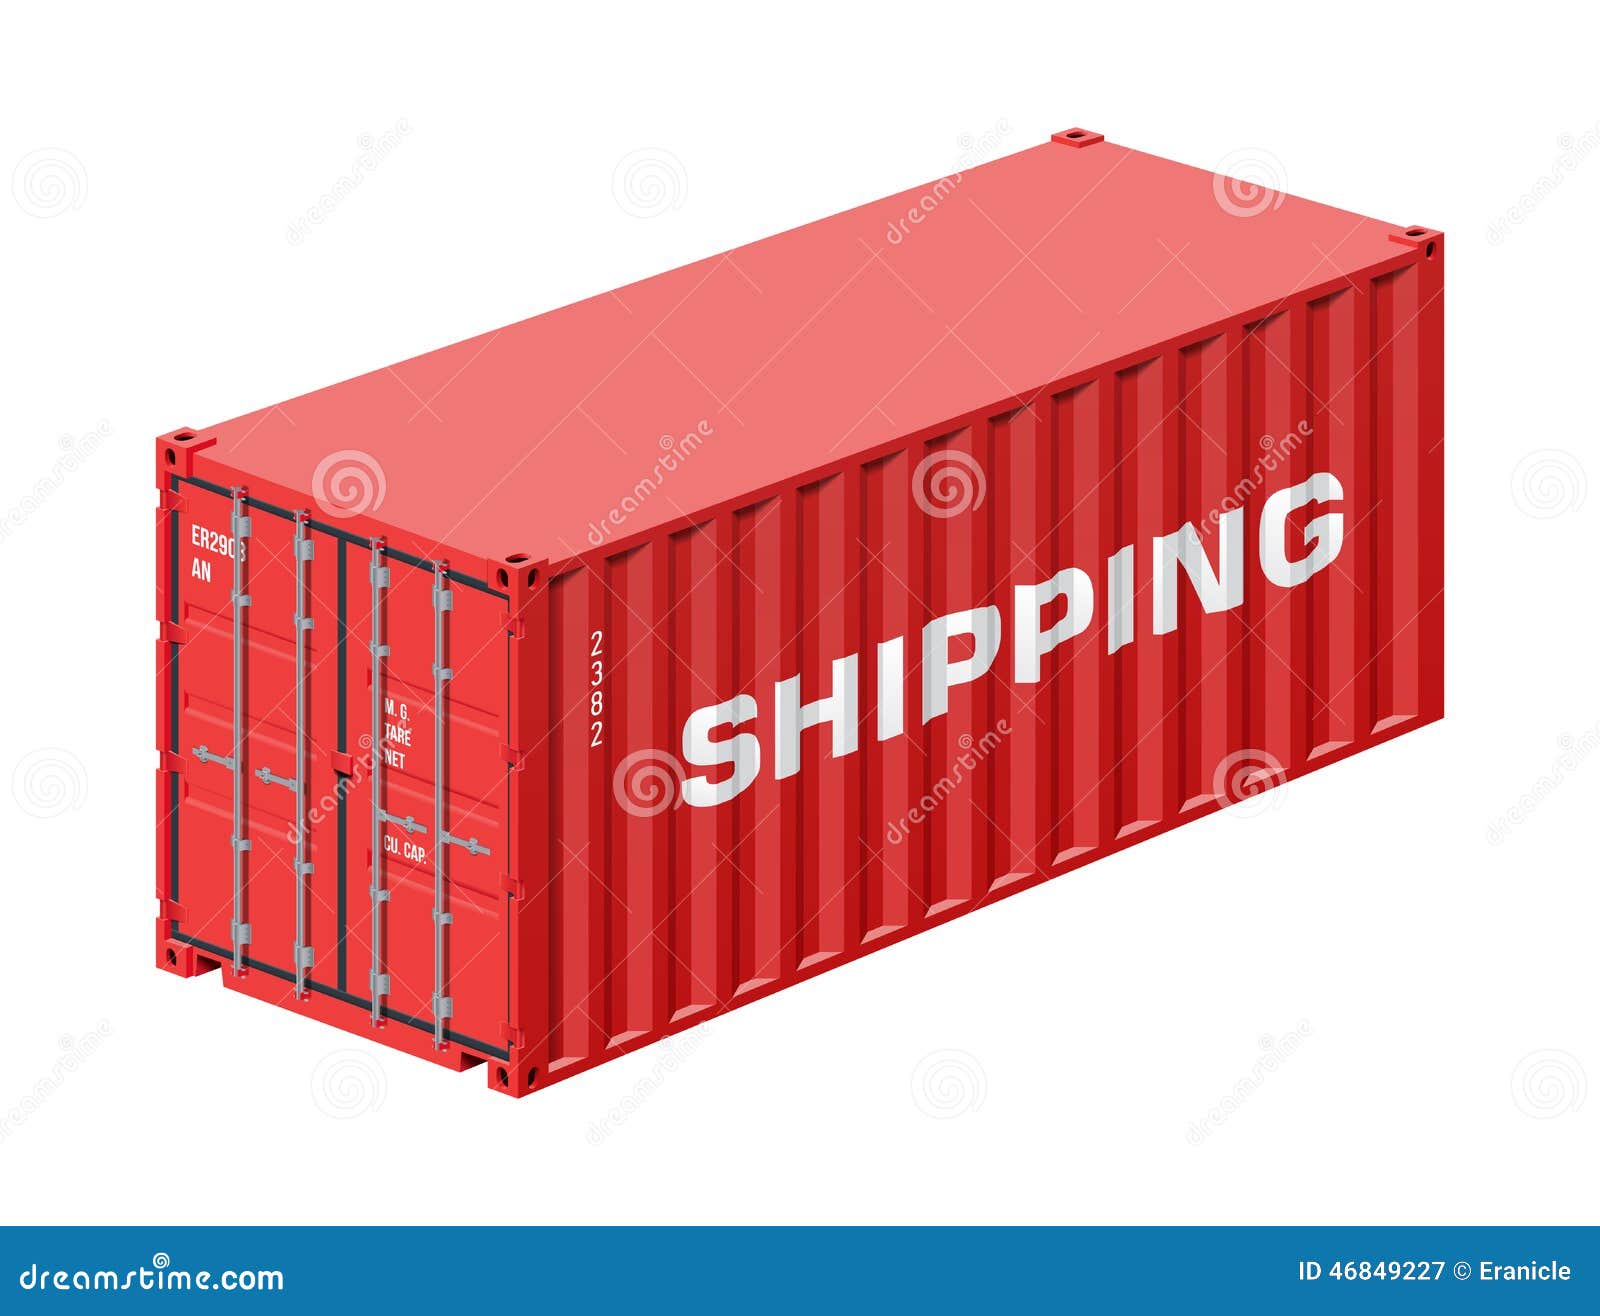 shipping container clipart - photo #8